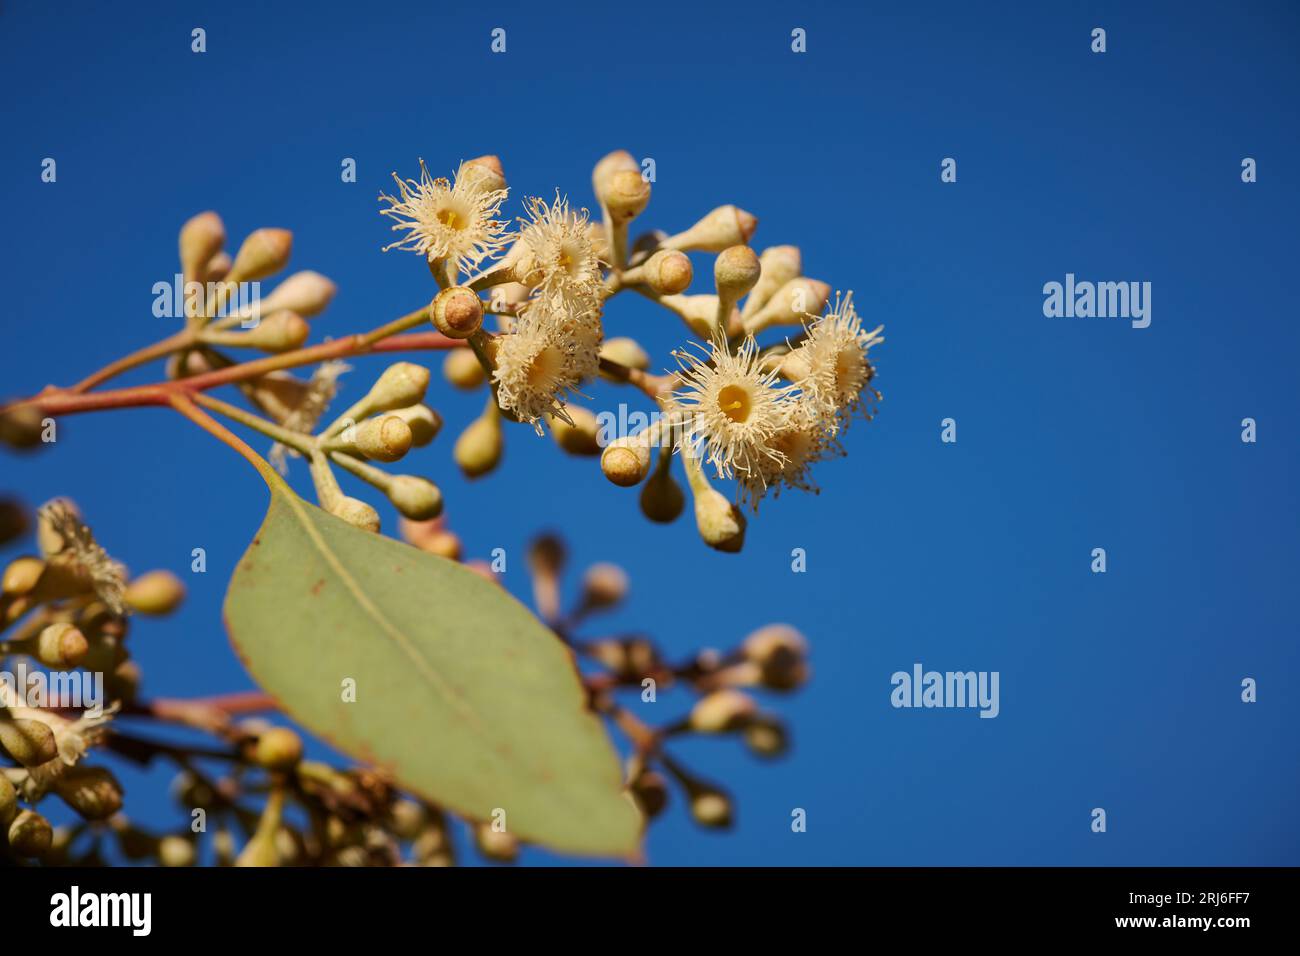 A cluster of Eucalyptus polyanthemos flowers photographed against a blue sky with plenty of negative space. Stock Photo